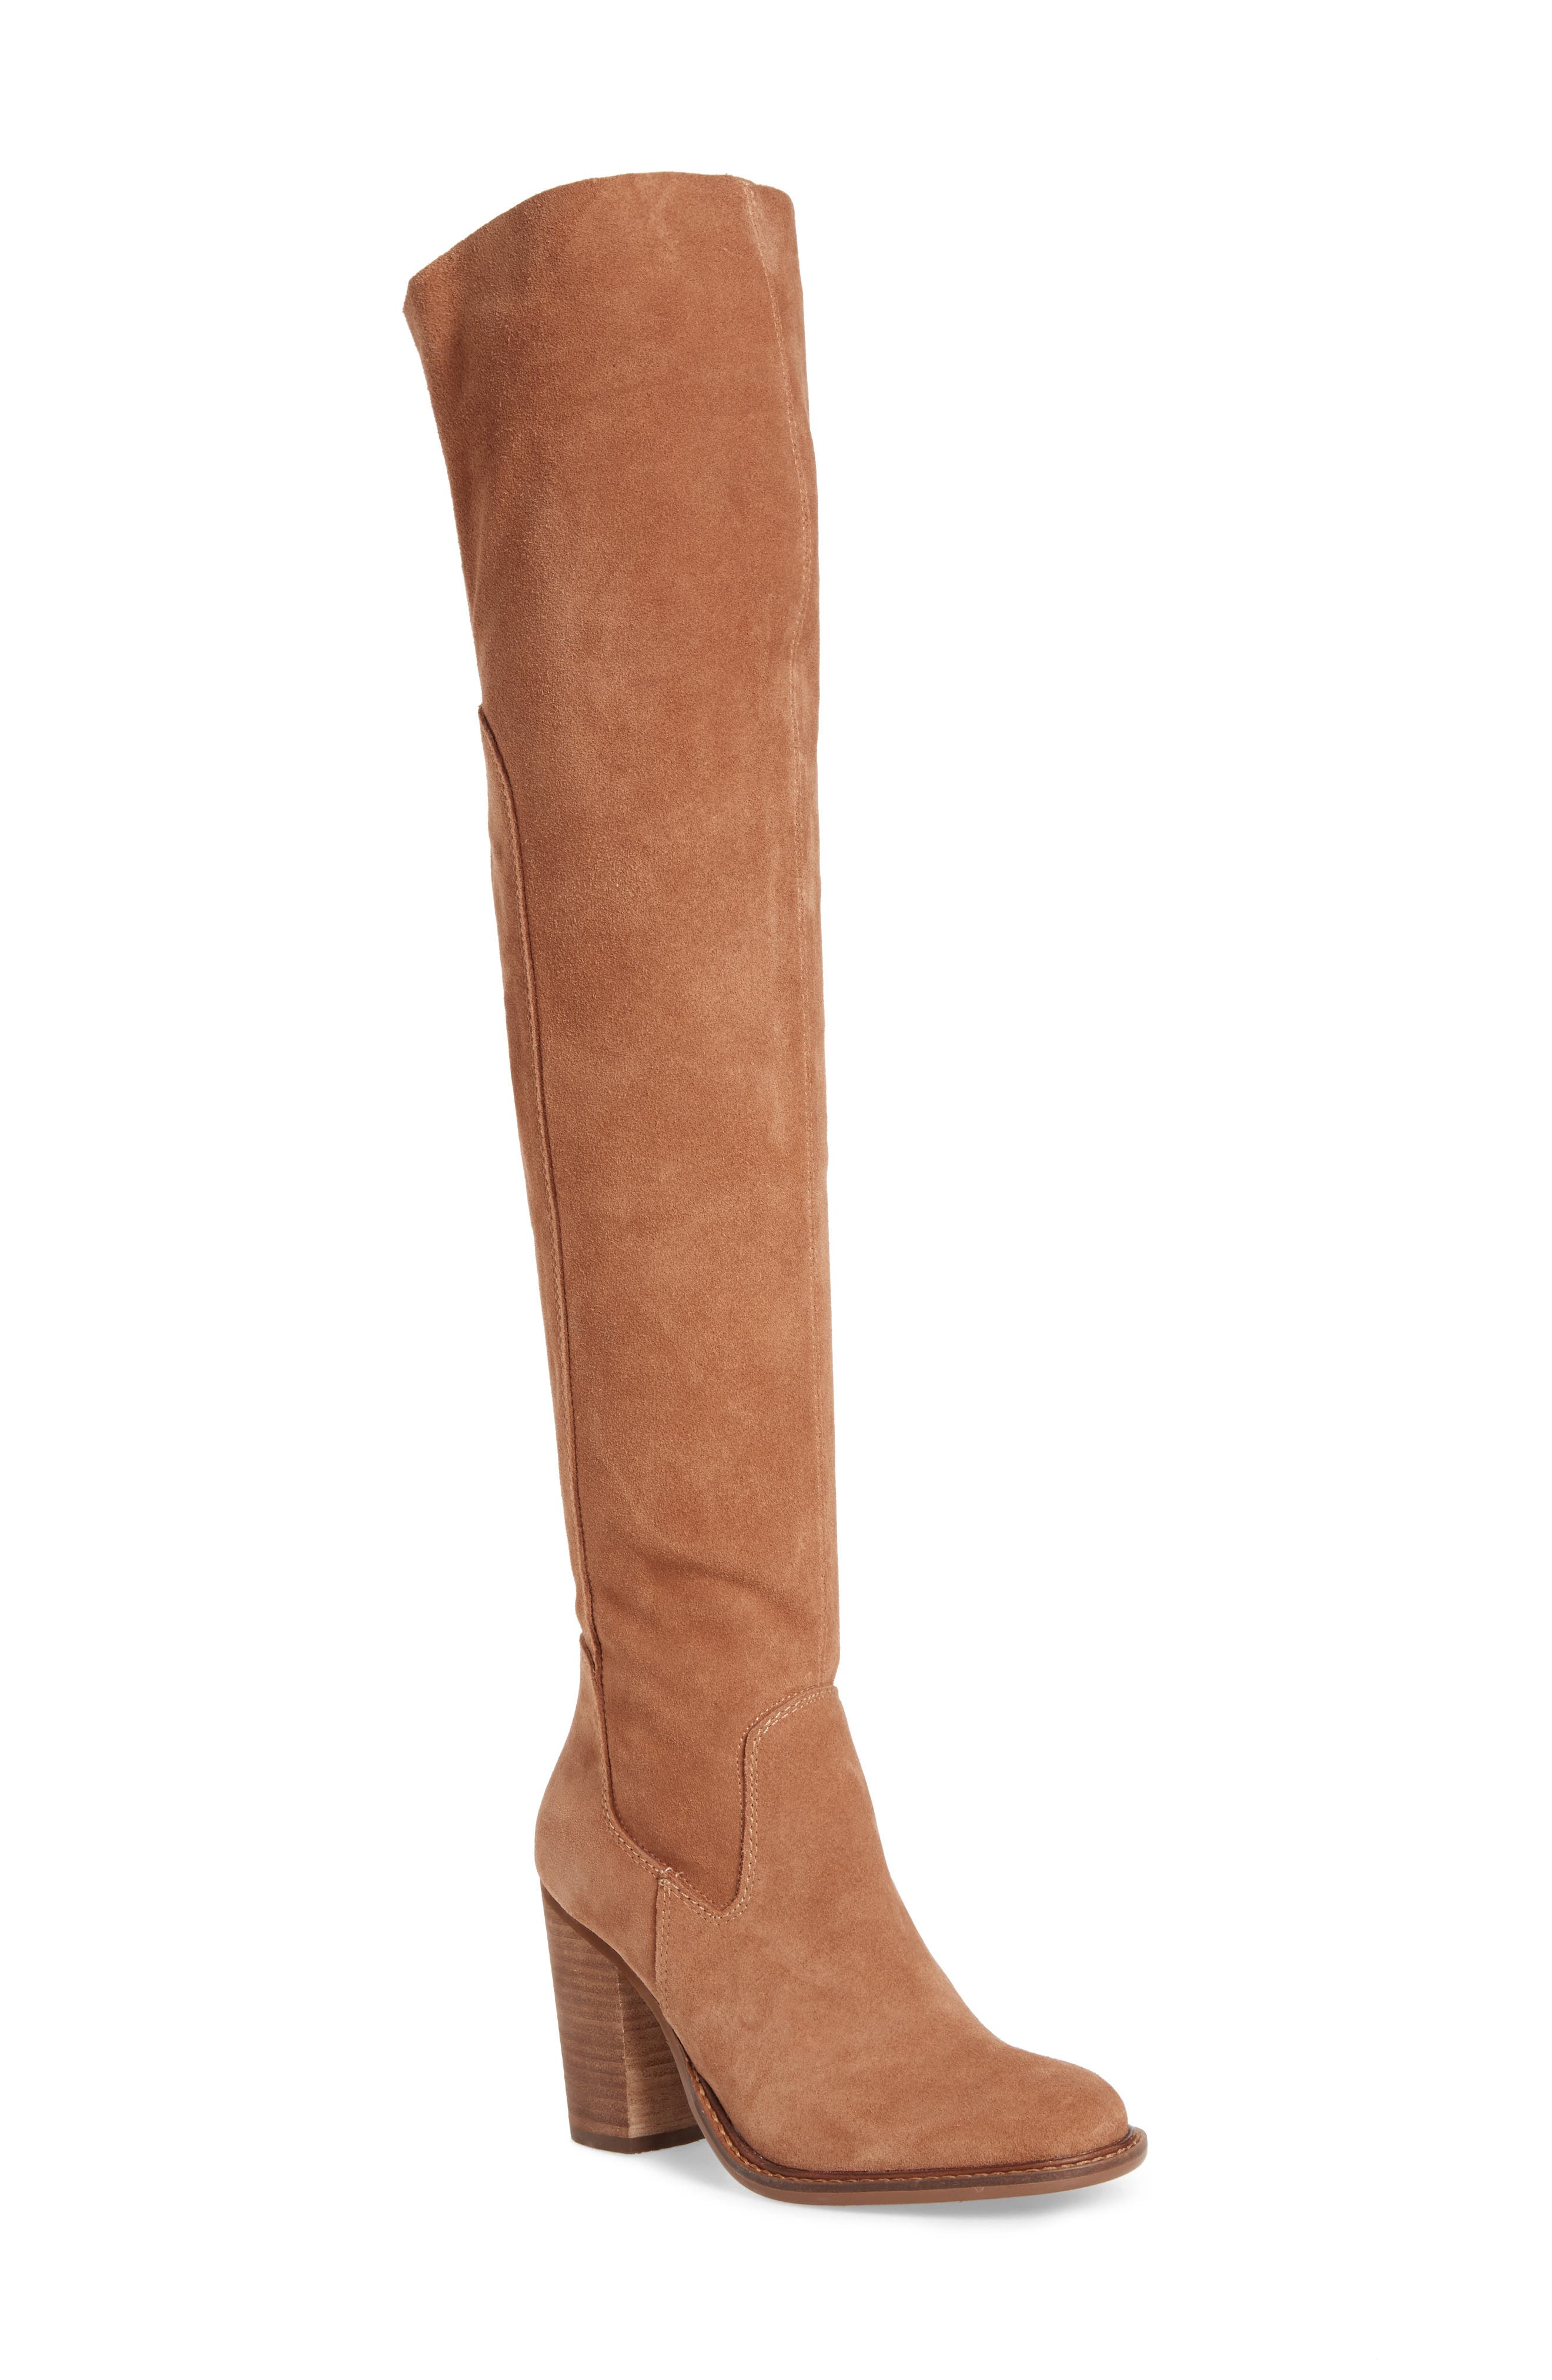 Spot On F5R0202 Ladies Knee High Boots In Brown R10A 